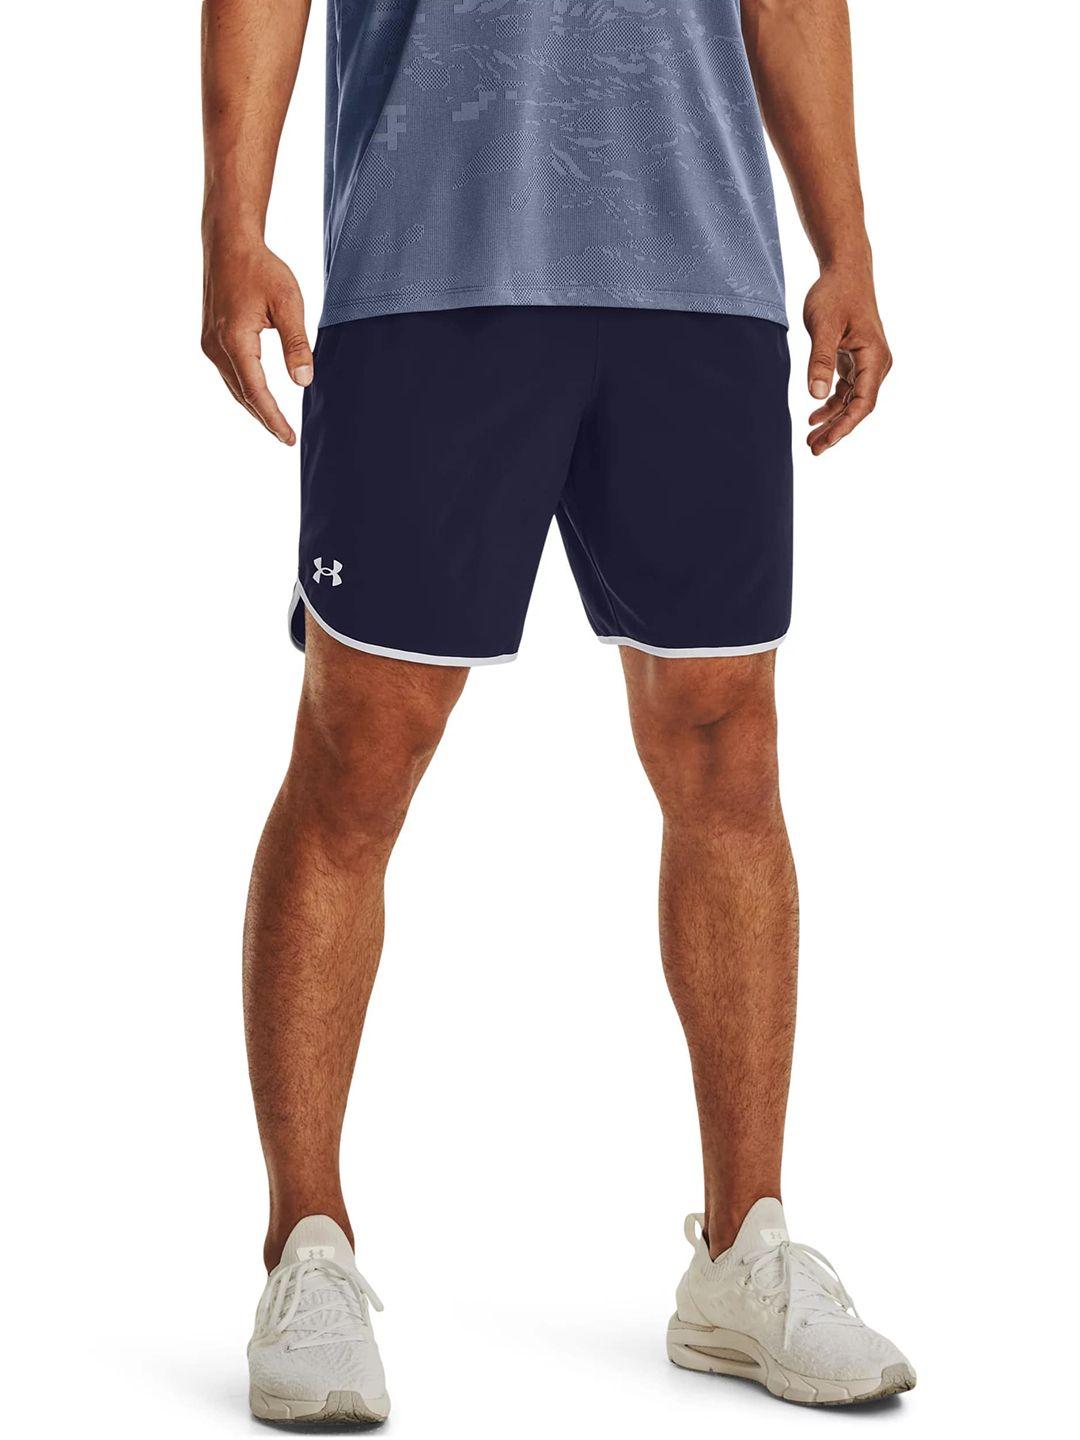 under-armour-men-loose-fit-low-rise-training-sports-shorts